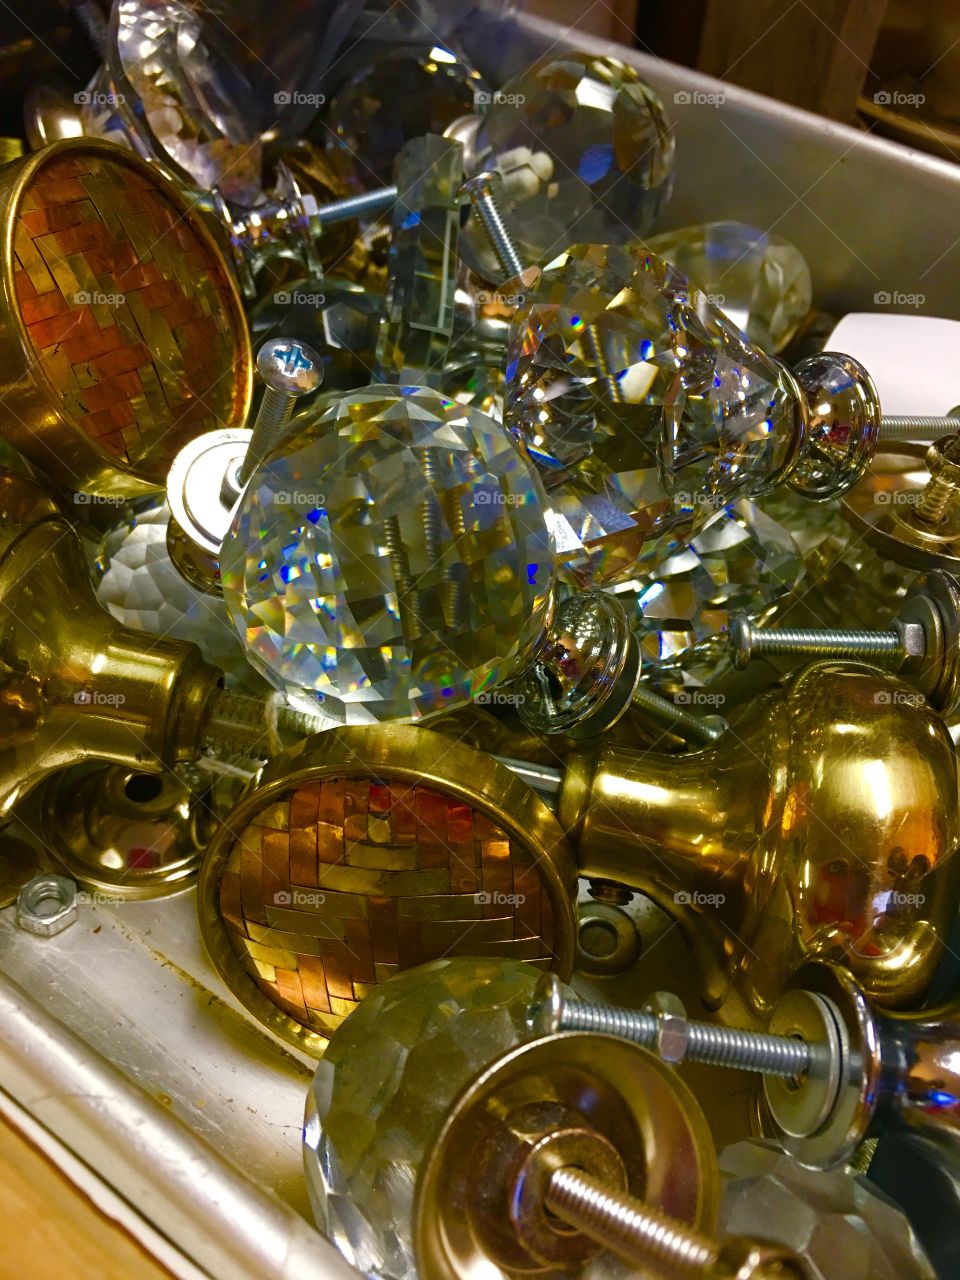 A bunch of abandoned discarded knobs in a pile